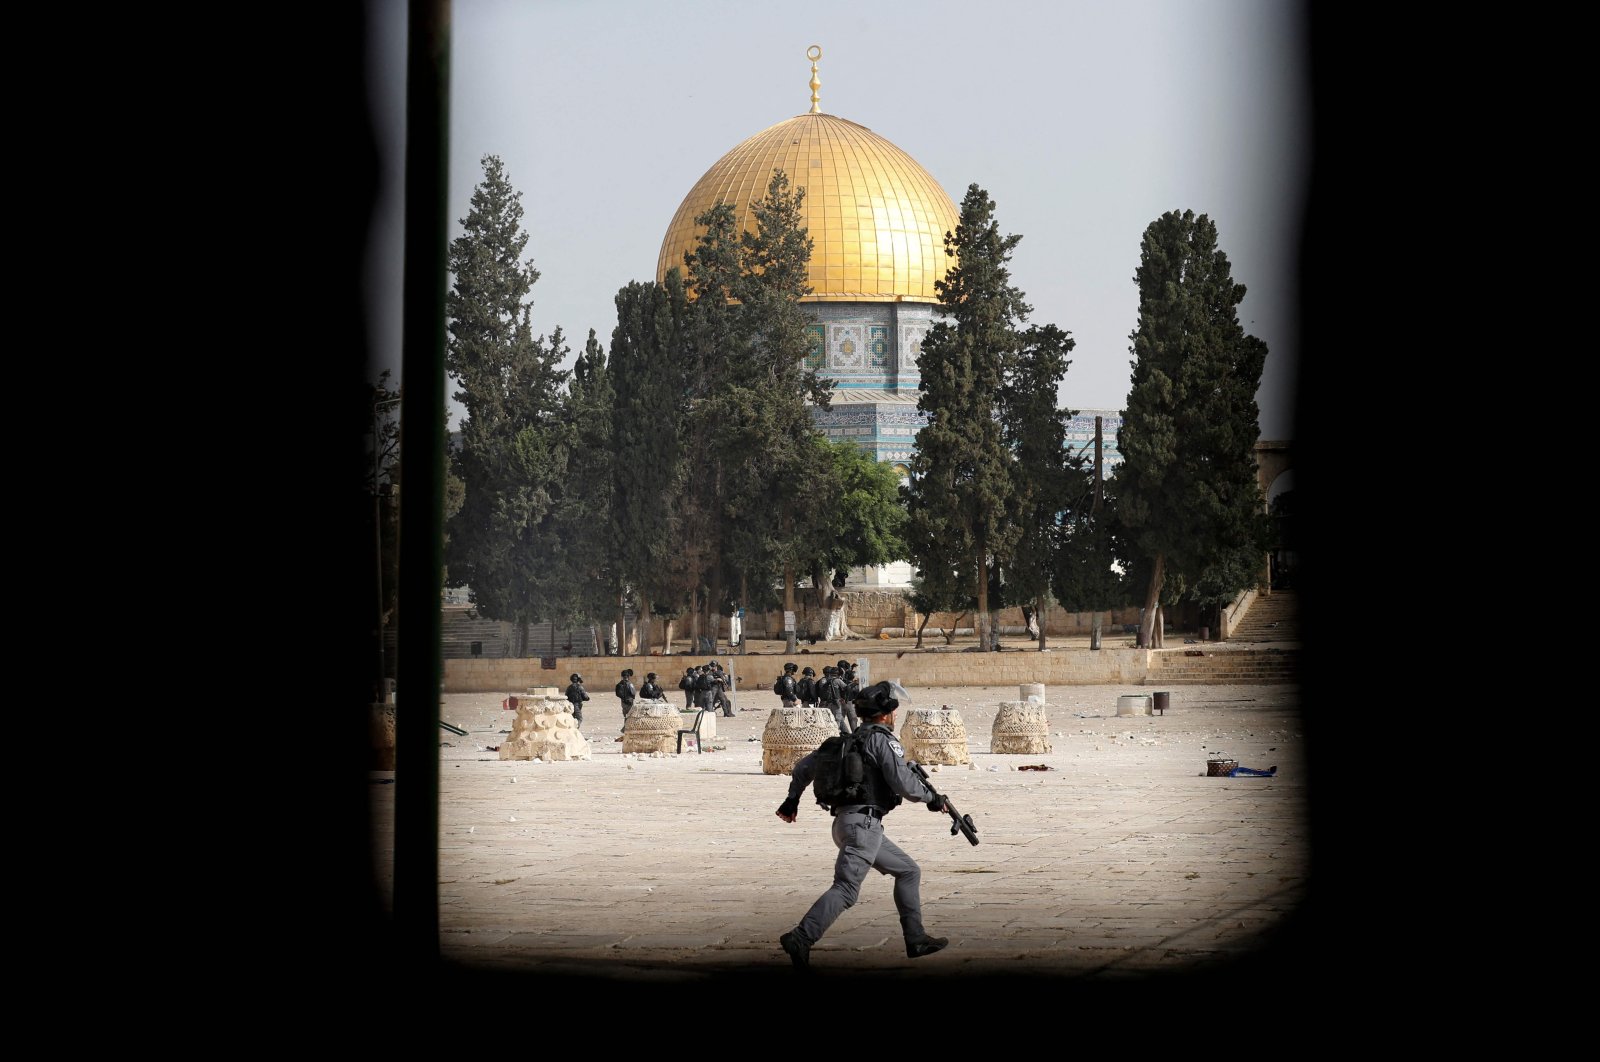 Israeli security forces deploy amid clashes with Palestinians at the Al-Aqsa mosque compound ahead of a planned march to commemorate Israel's takeover of Jerusalem in the 1967 Six-Day War, East Jerusalem, occupied Palestine, May 10, 2021, (AFP Photo)